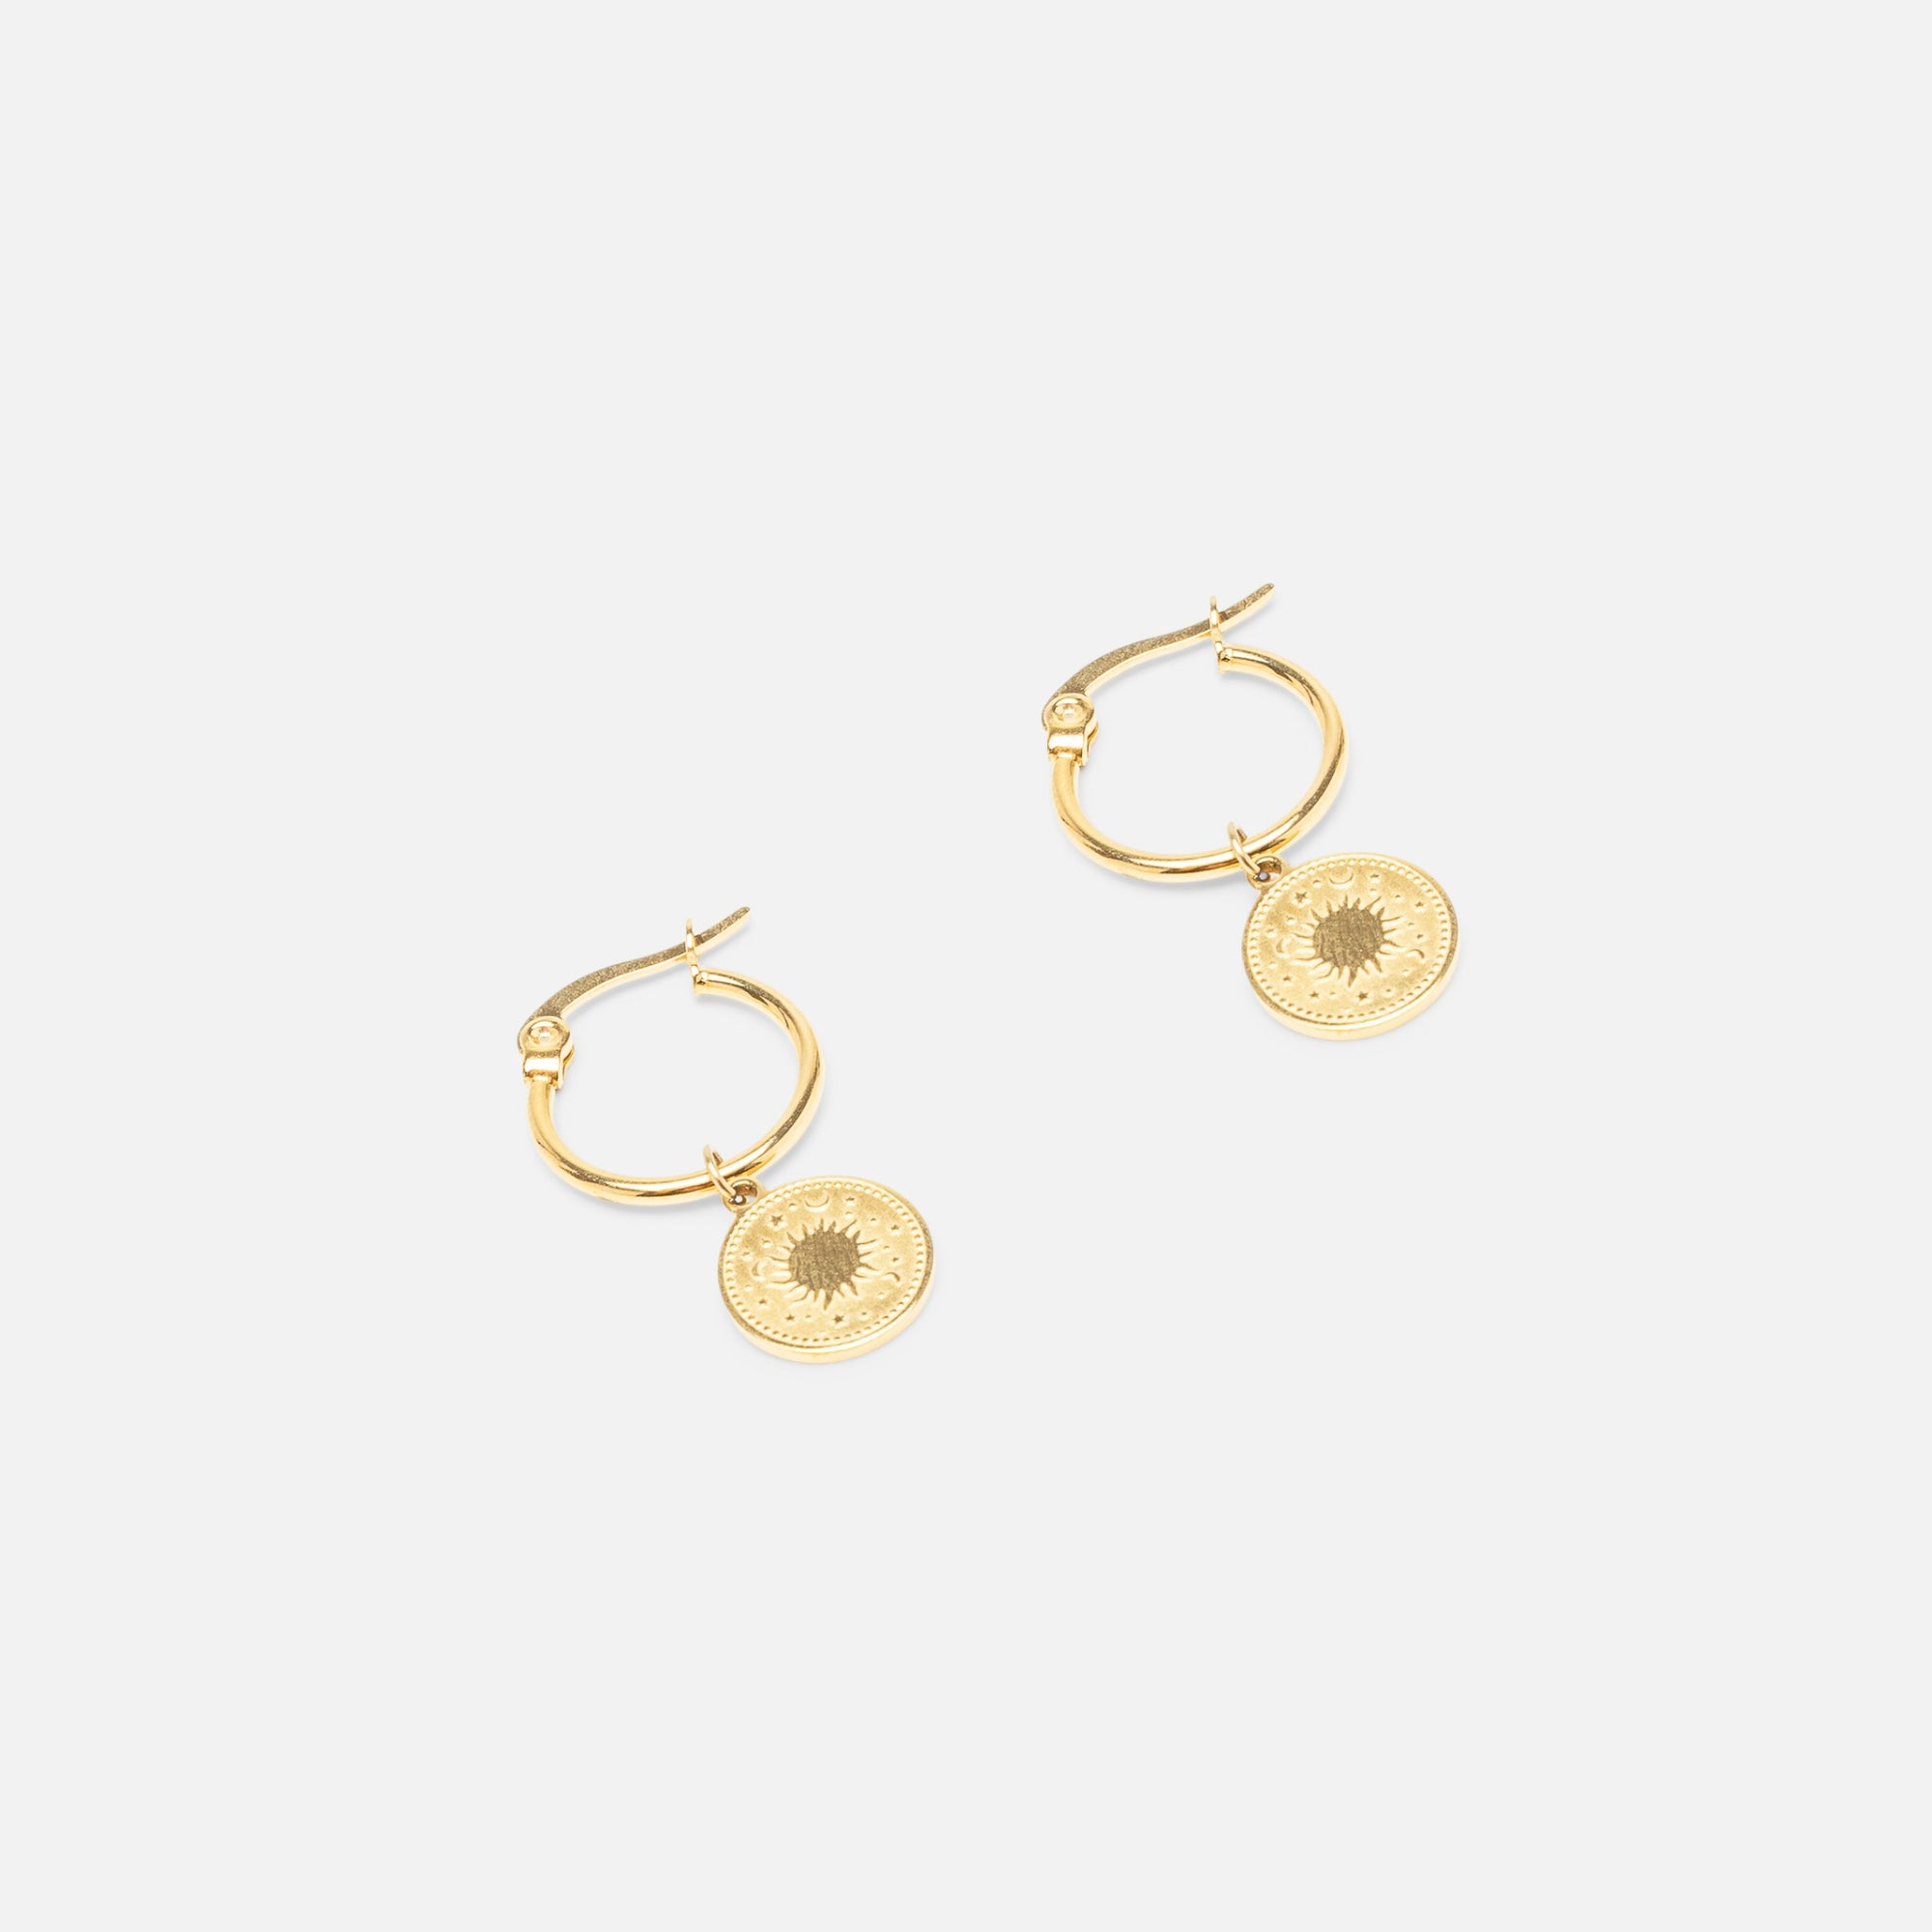 Golden hoop earrings with sun and moon charm